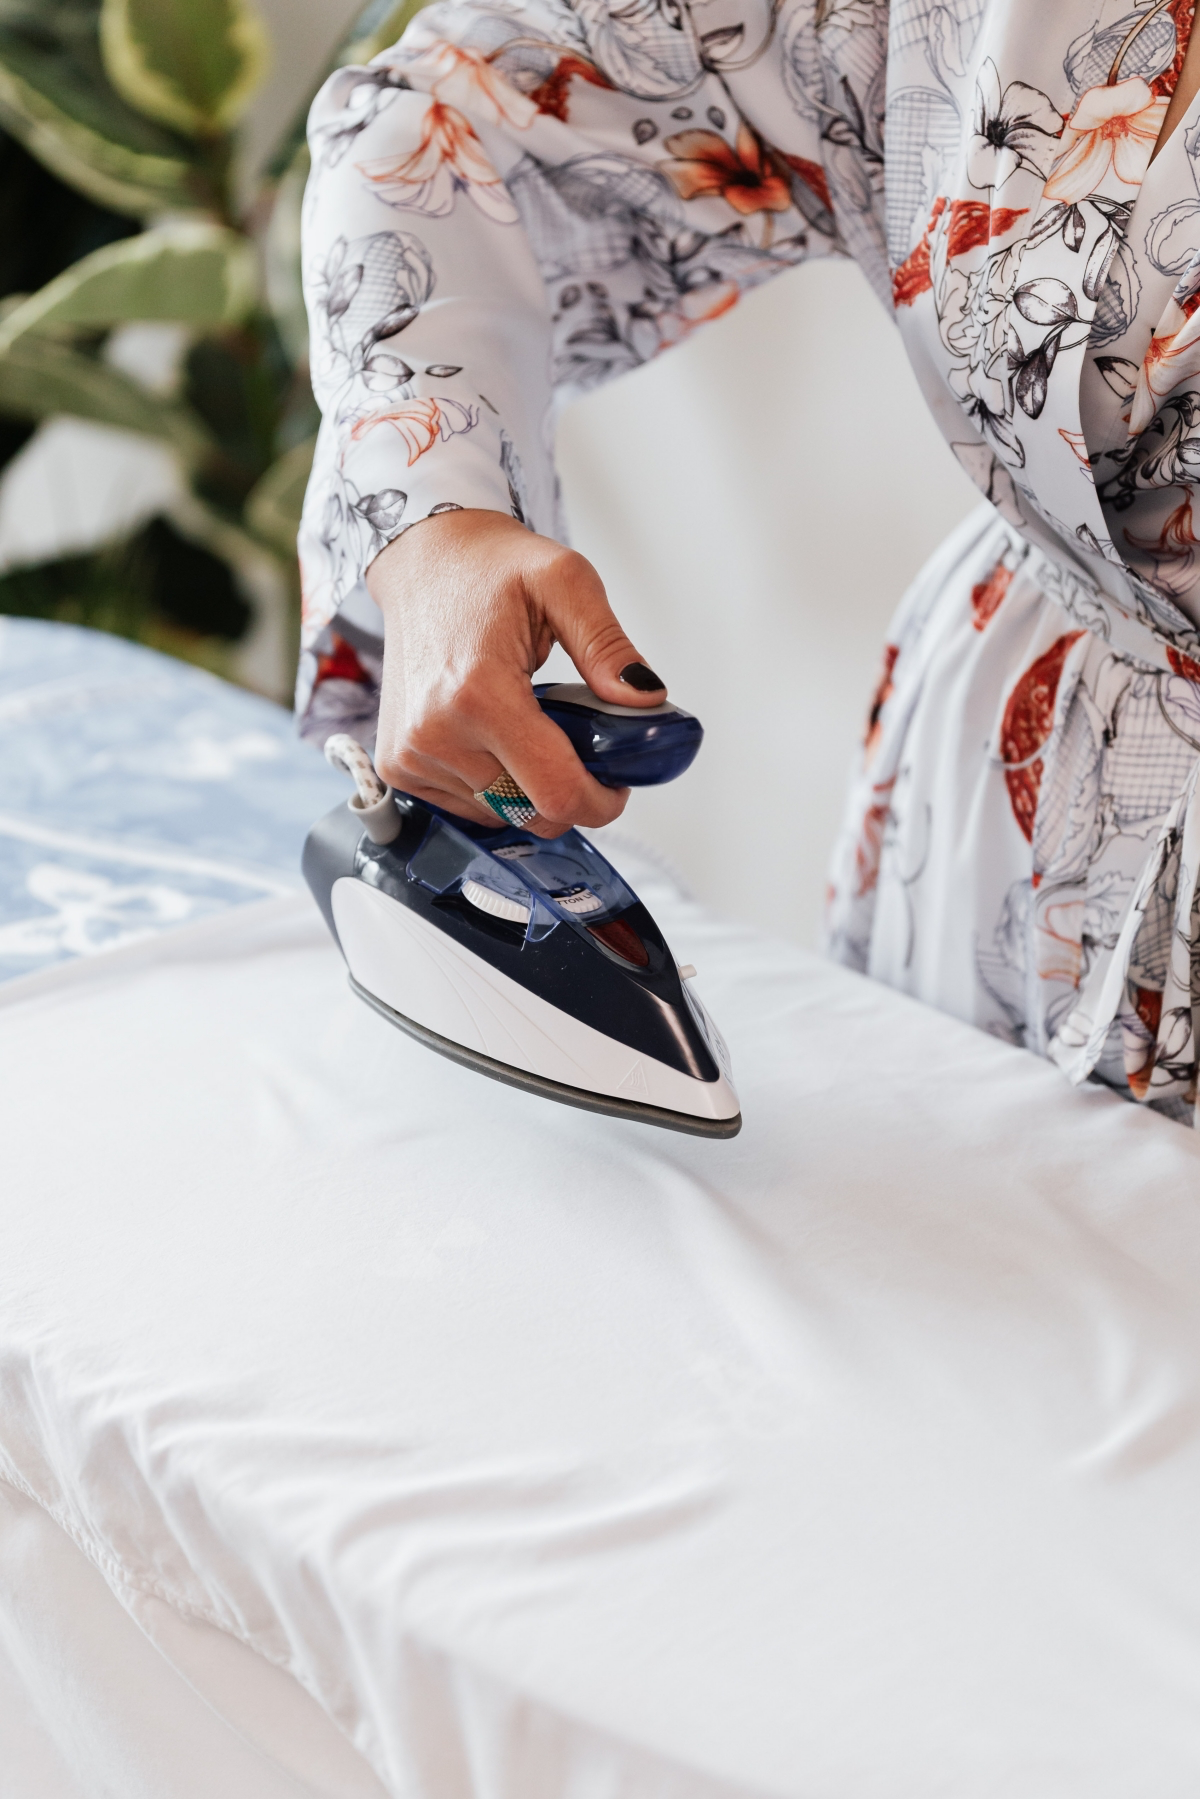 ironing clothes without using an iron